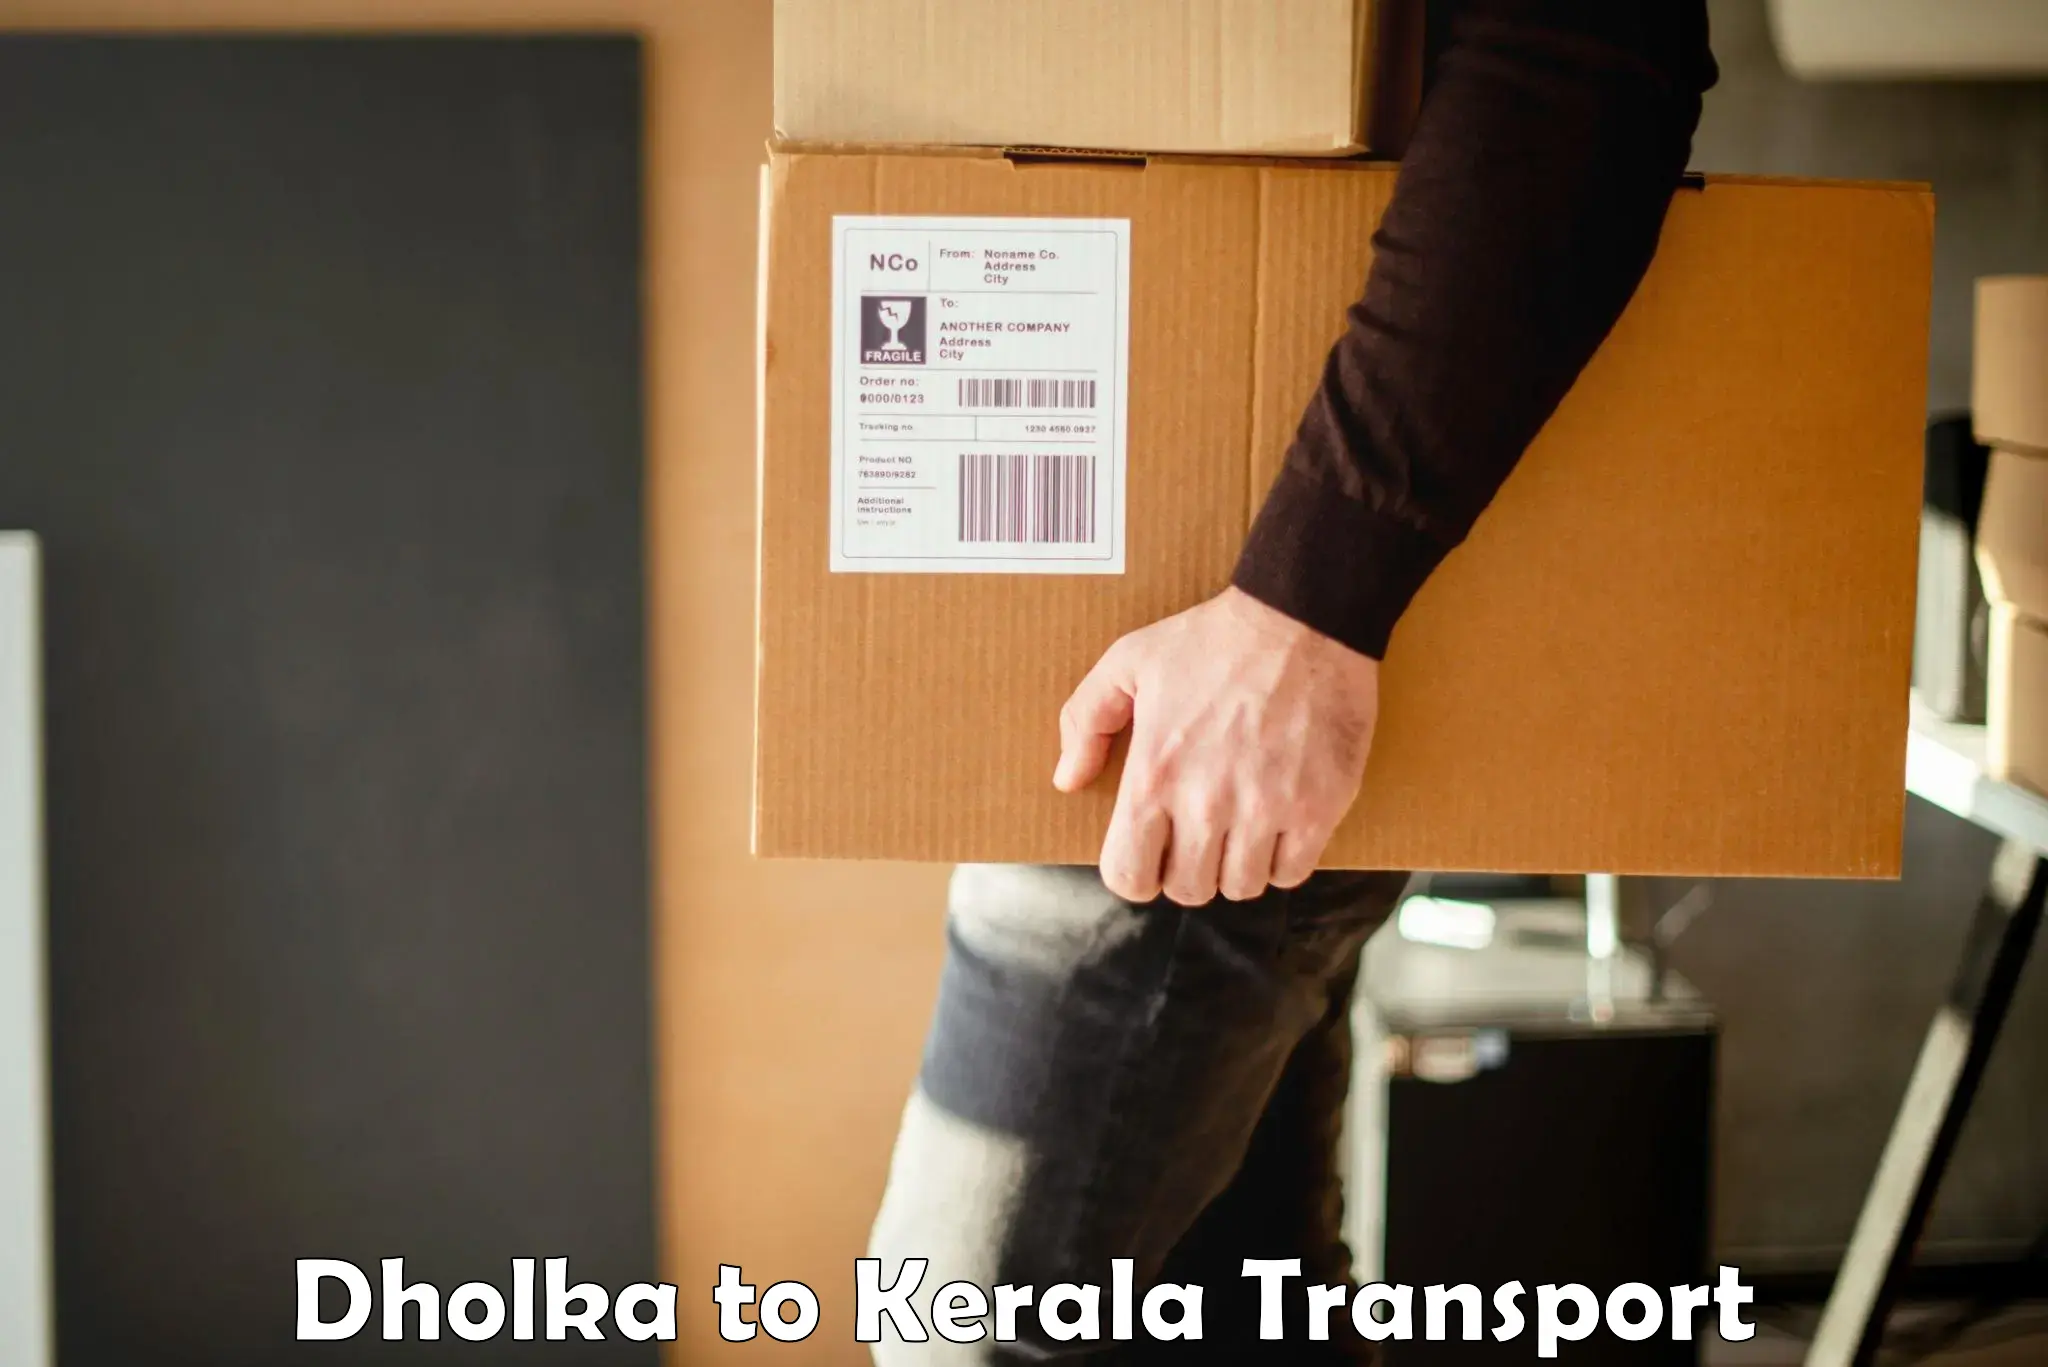 Nearby transport service Dholka to Kerala